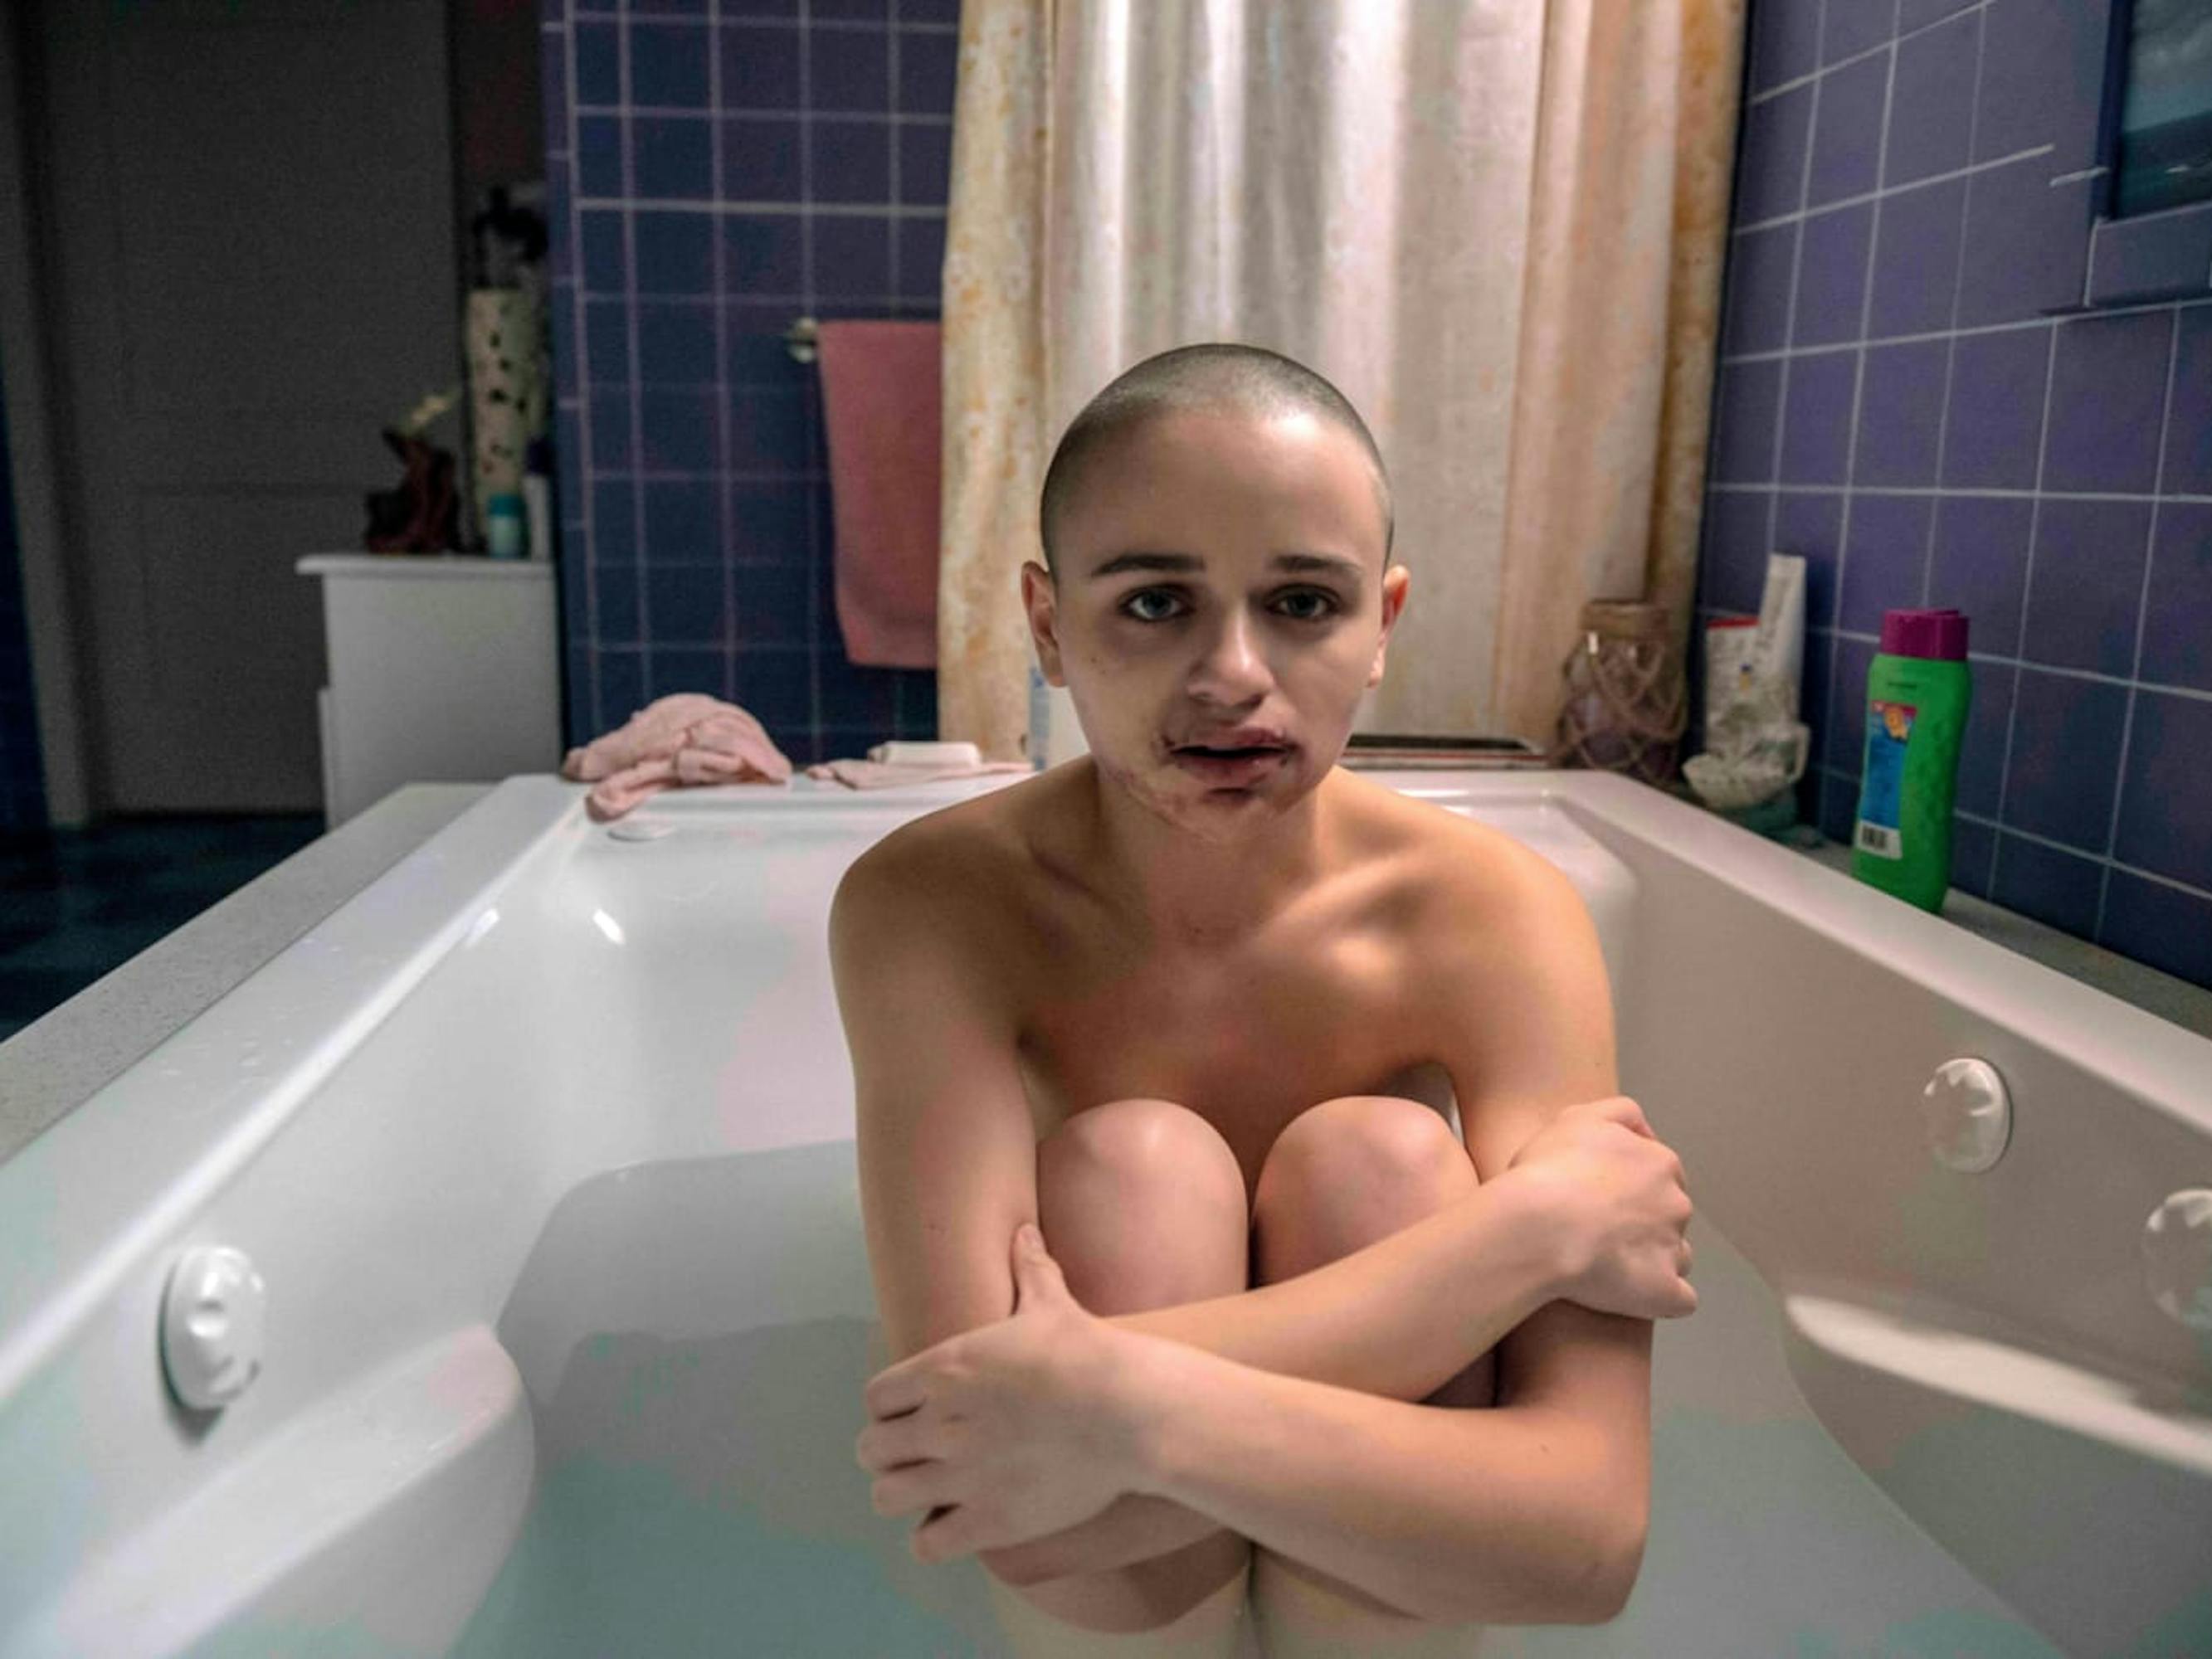 Gypsy Rose Blanchard (Joey King) in The Act sits in the bath, arms wrapped around her legs. The walls are covered in blue tiles, and different bath products scatter the side. Her mouth is bruised and scarred.